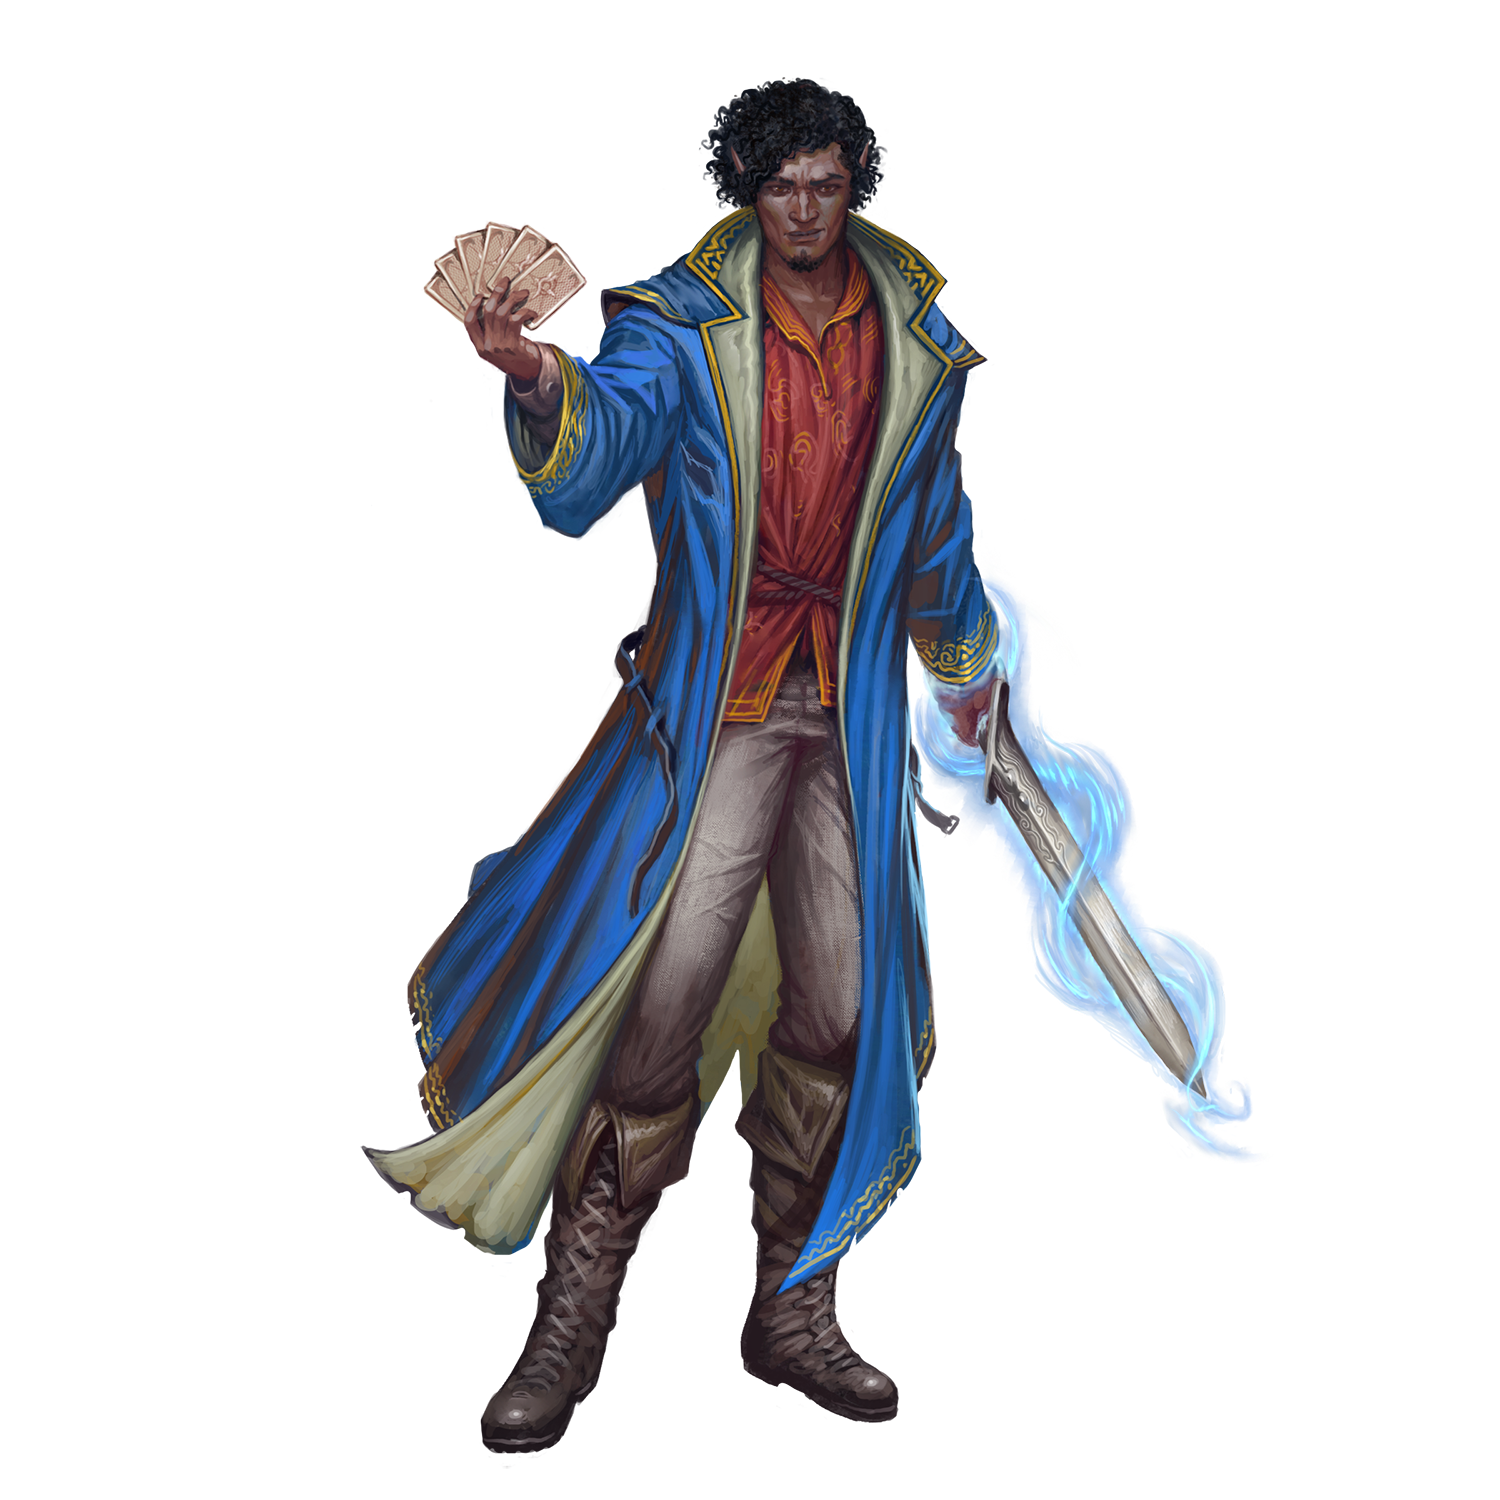 Dond Oom is a half elf of Garundi descent. He has warm brown skin, pointed ears that protrude from the loose curls of his jet black hair, and brown eyes. He’s dressed in elaborate, finely tailored clothing, including a finely made tunic under an embroidered vest as well as well-made trousers tucked neatly into mid-calve boots. Over his vest, he has a navy blue long-coat. In one hand, he has a fan of playing cards (he’s a gambler by trade), and in the other, he has a wide-bladed shortsword that has a hint of magic running up and down the blade, flowing from his hand.